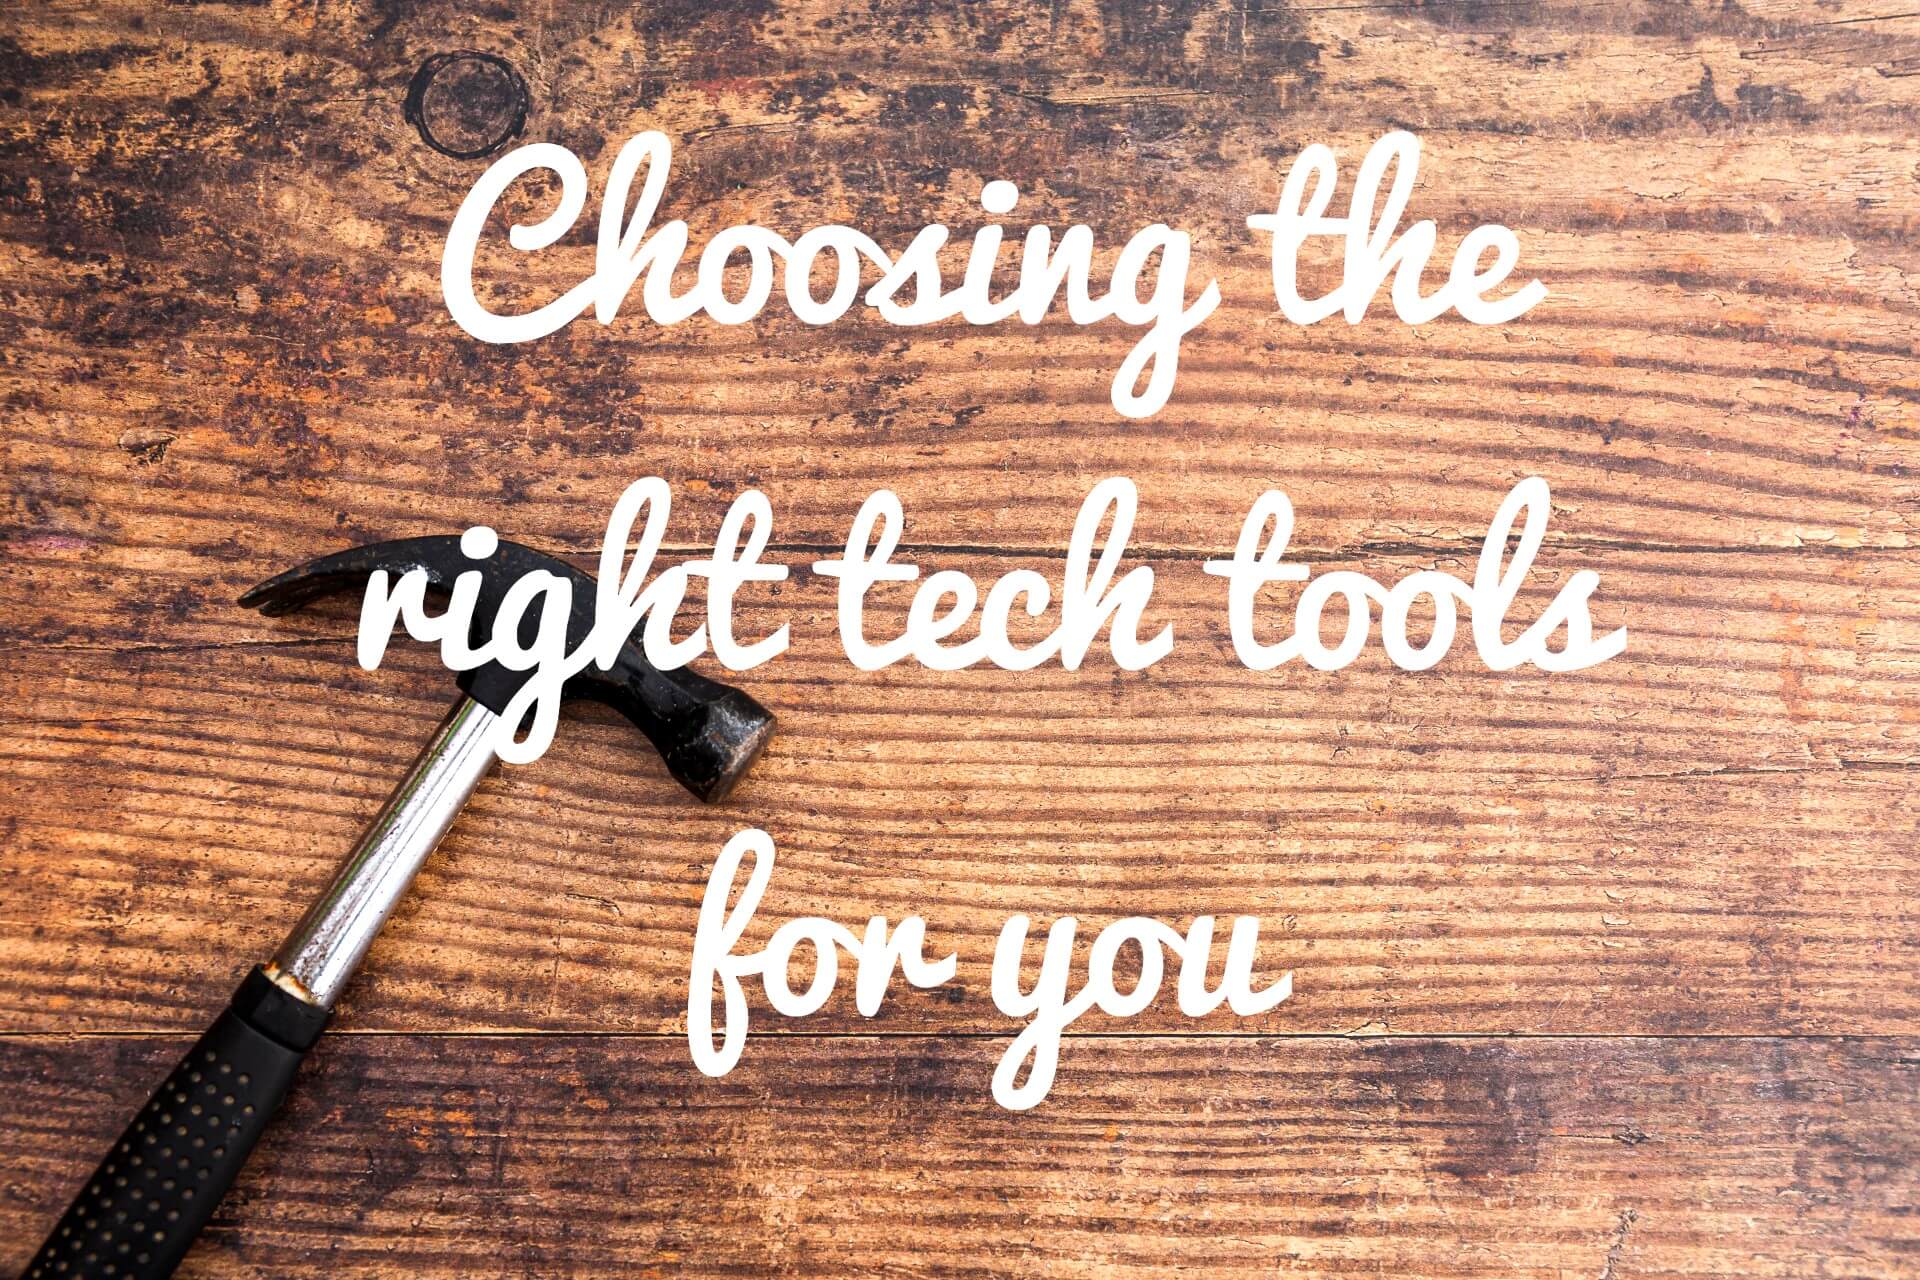 Tech Tools: How To Choose The Right Ones For You